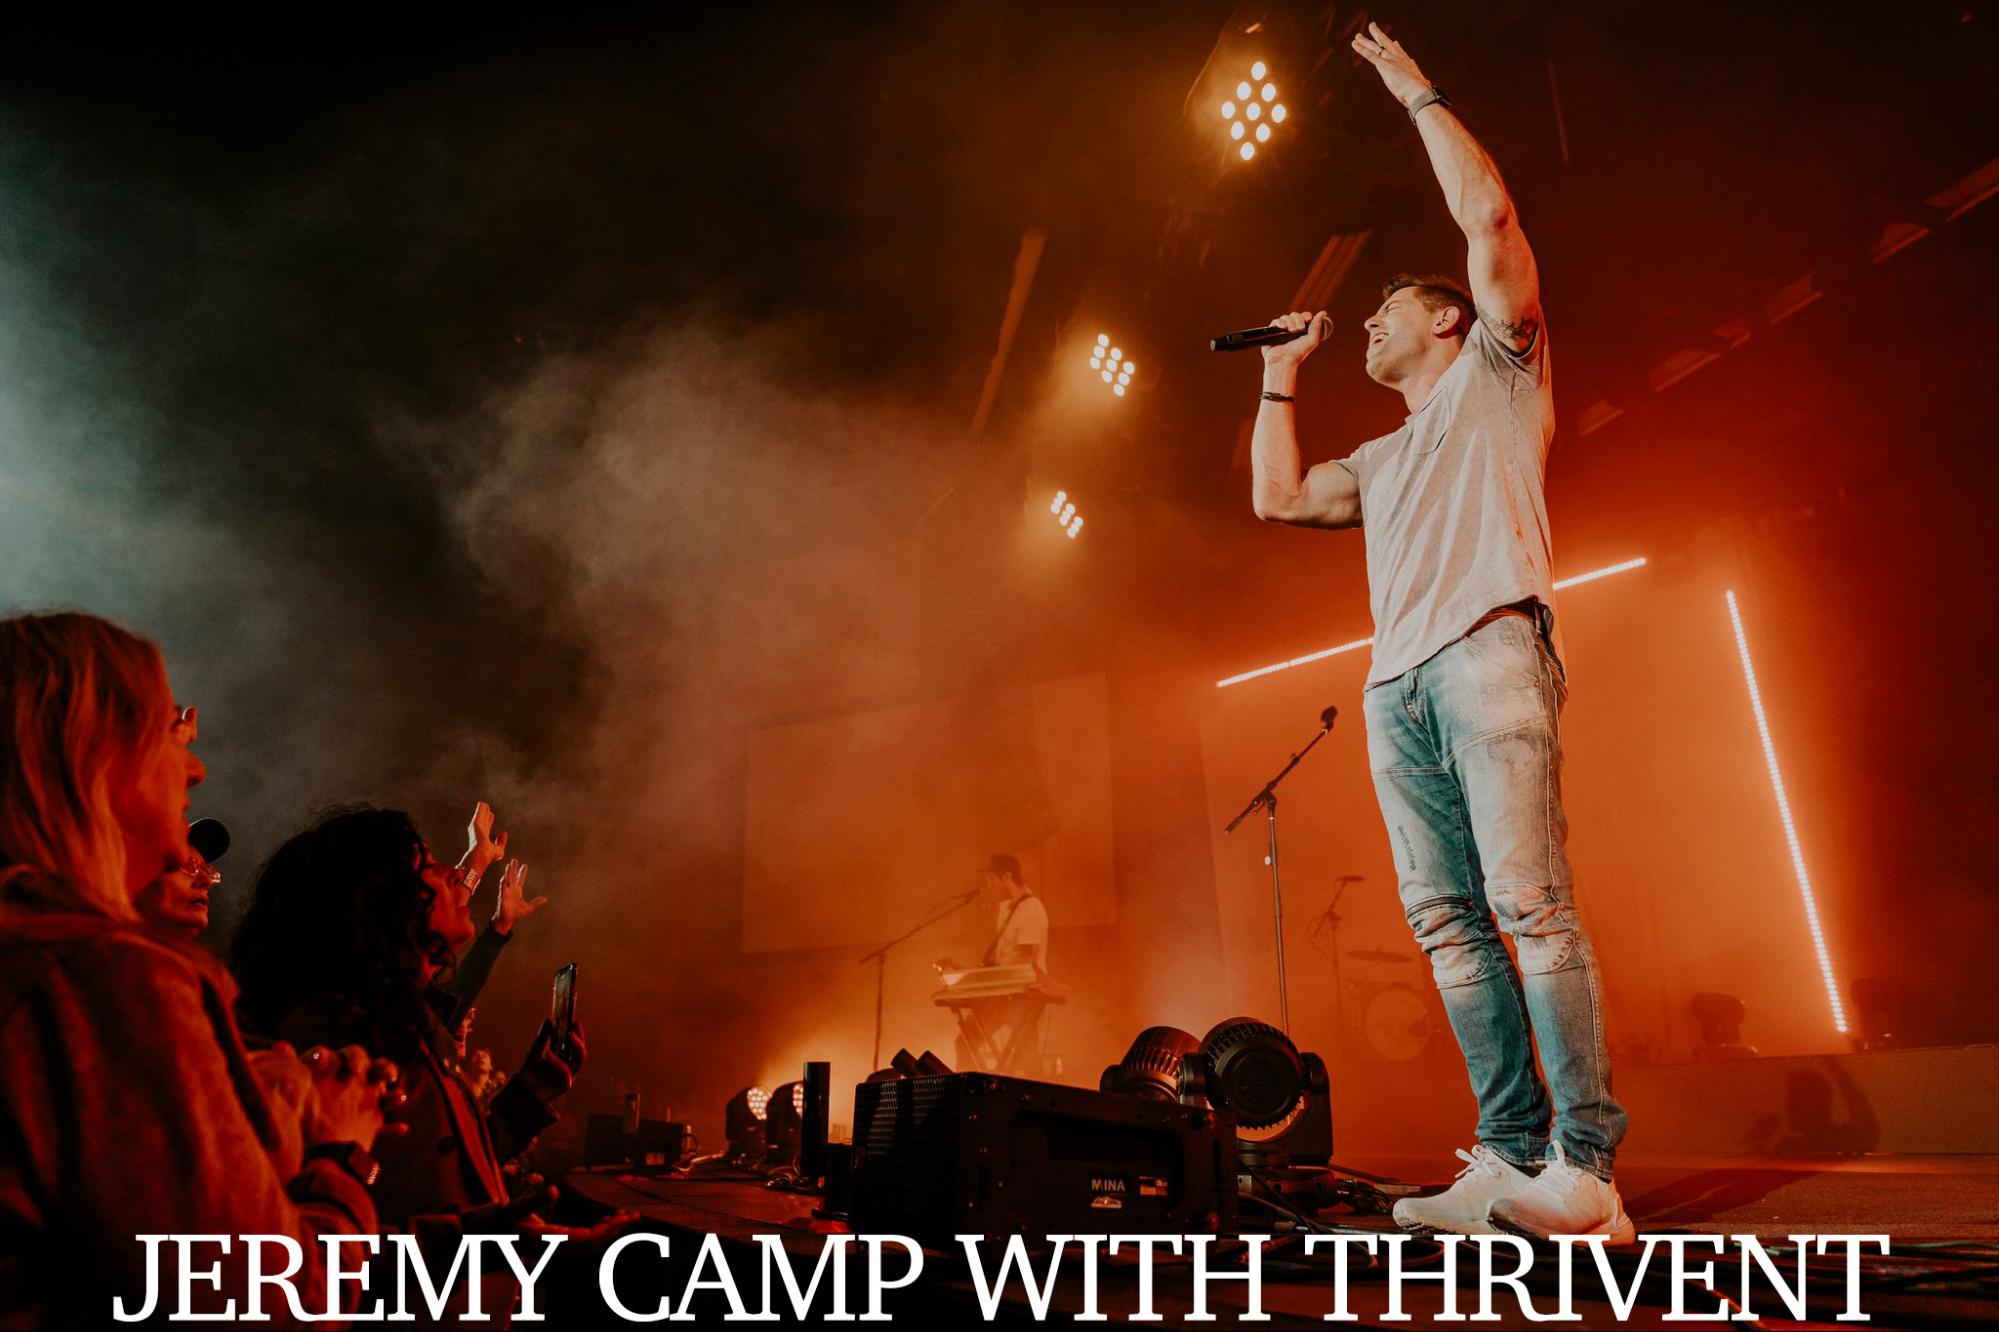 Jeremy Camp with Thrivent